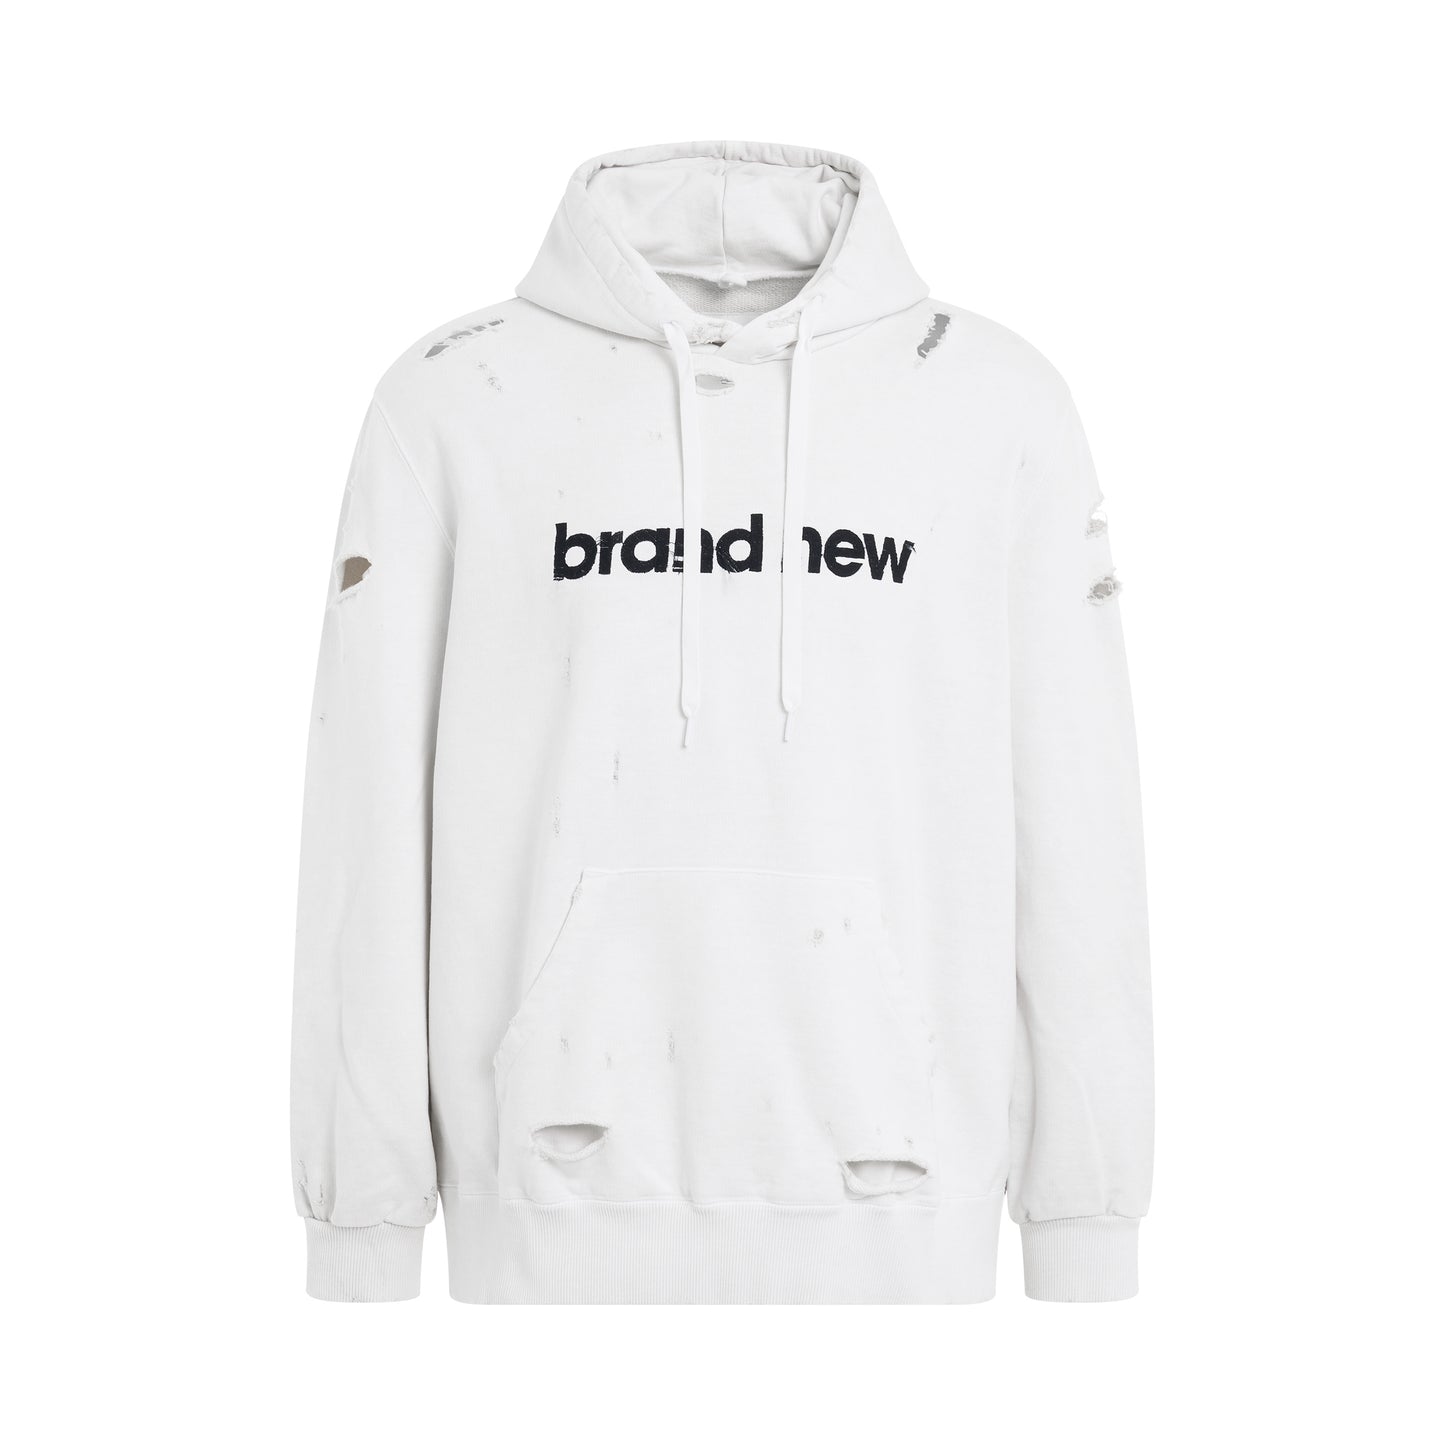 Destroyed Hoodie in White